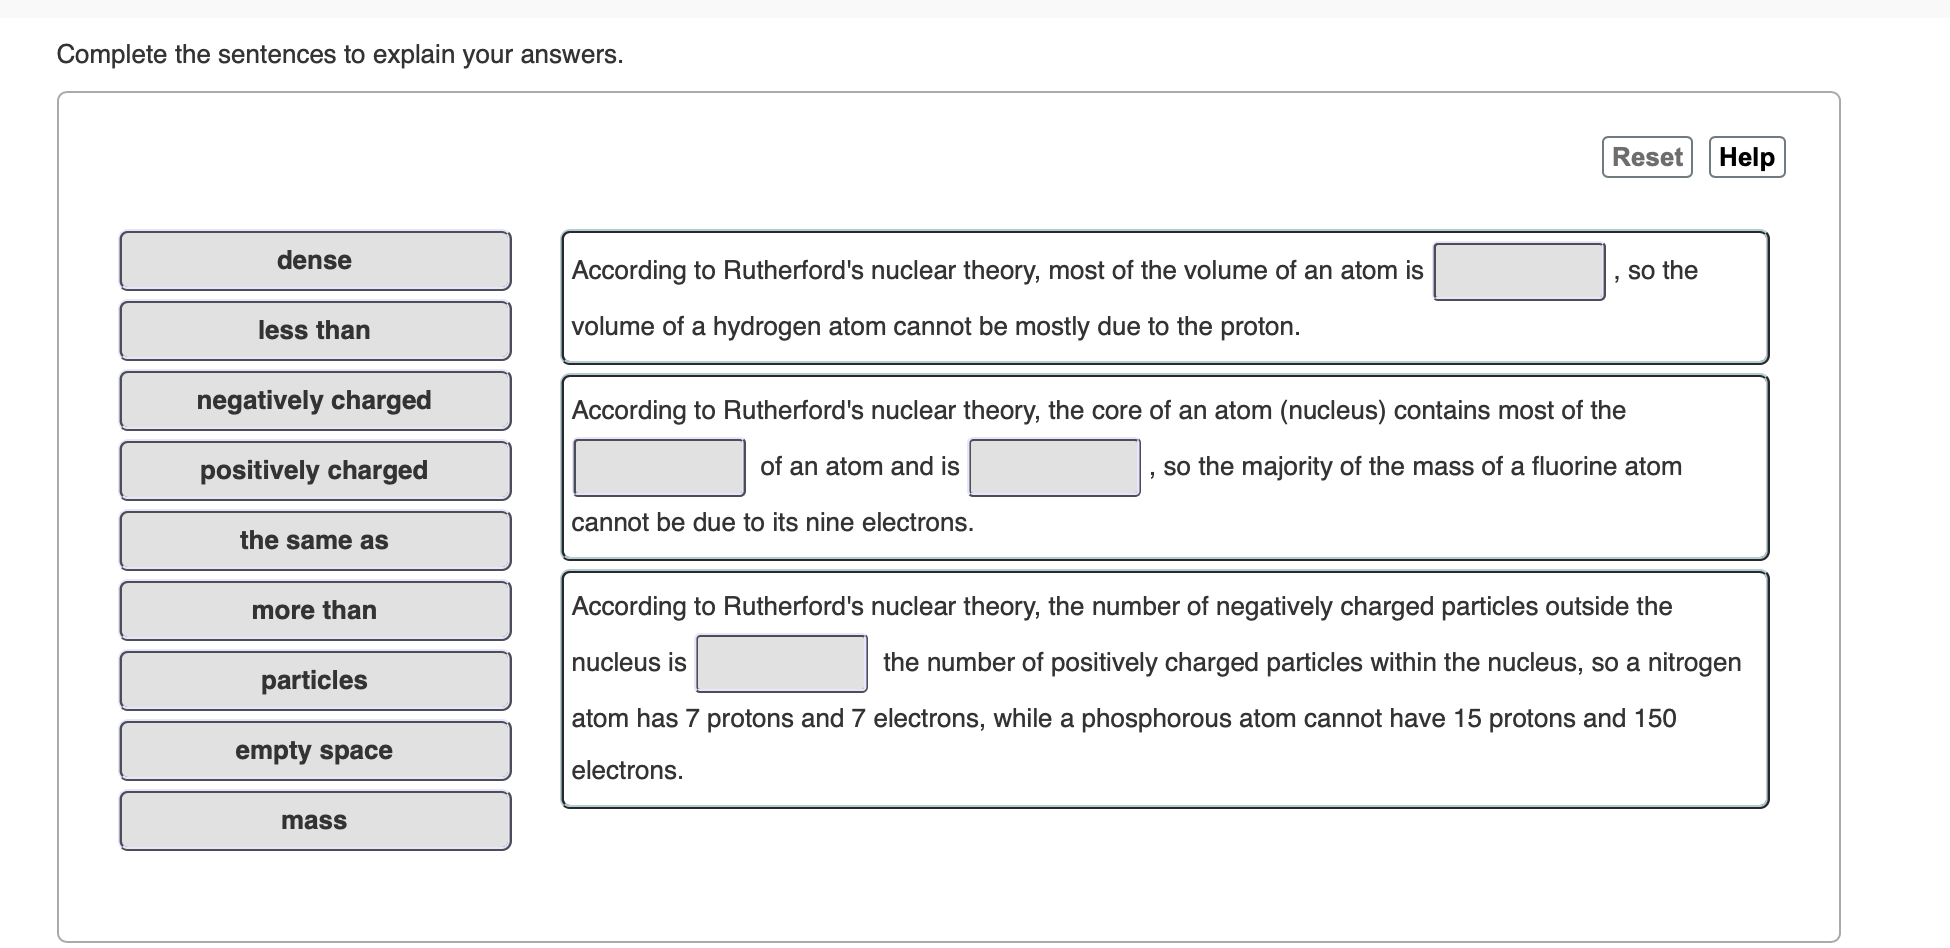 Complete the sentences to explain your answers.
Reset Help
dense
According to Rutherford's nuclear theory, most of the volume of an atom is
so the
volume of a hydrogen atom cannot be mostly due to the proton.
less than
negatively charged
According to Rutherford's nuclear theory, the core of an atom (nucleus) contains most of the
of an atom and is
so the majority of the mass of a fluorine atom
positively charged
cannot be due to its nine electrons.
the same as
According to Rutherford's nuclear theory, the number of negatively charged particles outside the
more than
nucleus is
the number of positively charged particles within the nucleus, so a nitrogen
particles
atom has 7 protons and 7 electrons, while a phosphorous atom cannot have 15 protons and 150
empty space
electrons
mass
